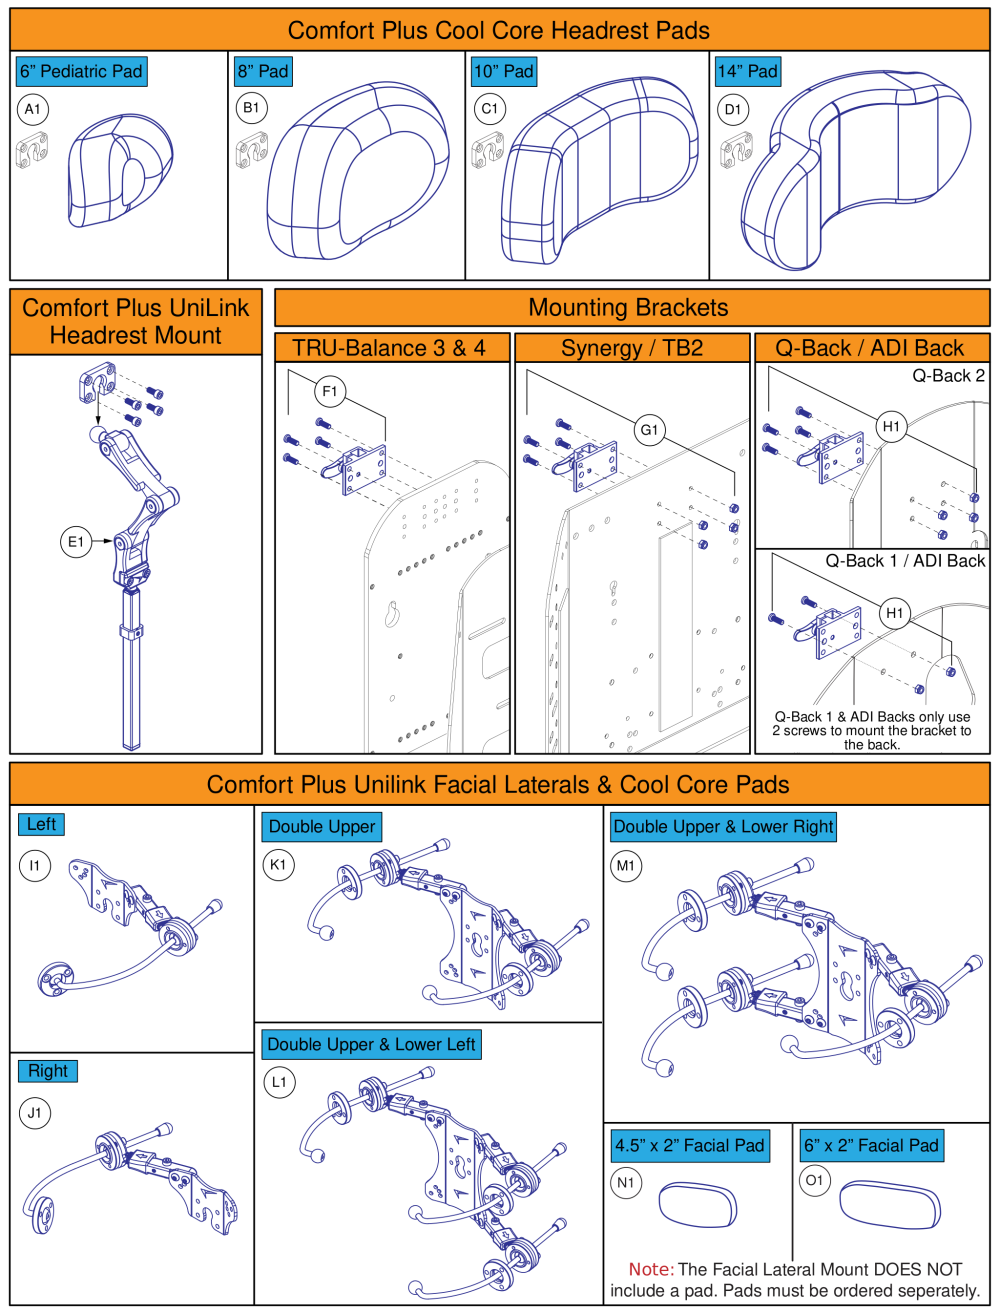 Stealth Comfort Plus Unilink Headrest Brackets, Pads, Laterals, And Mounts parts diagram